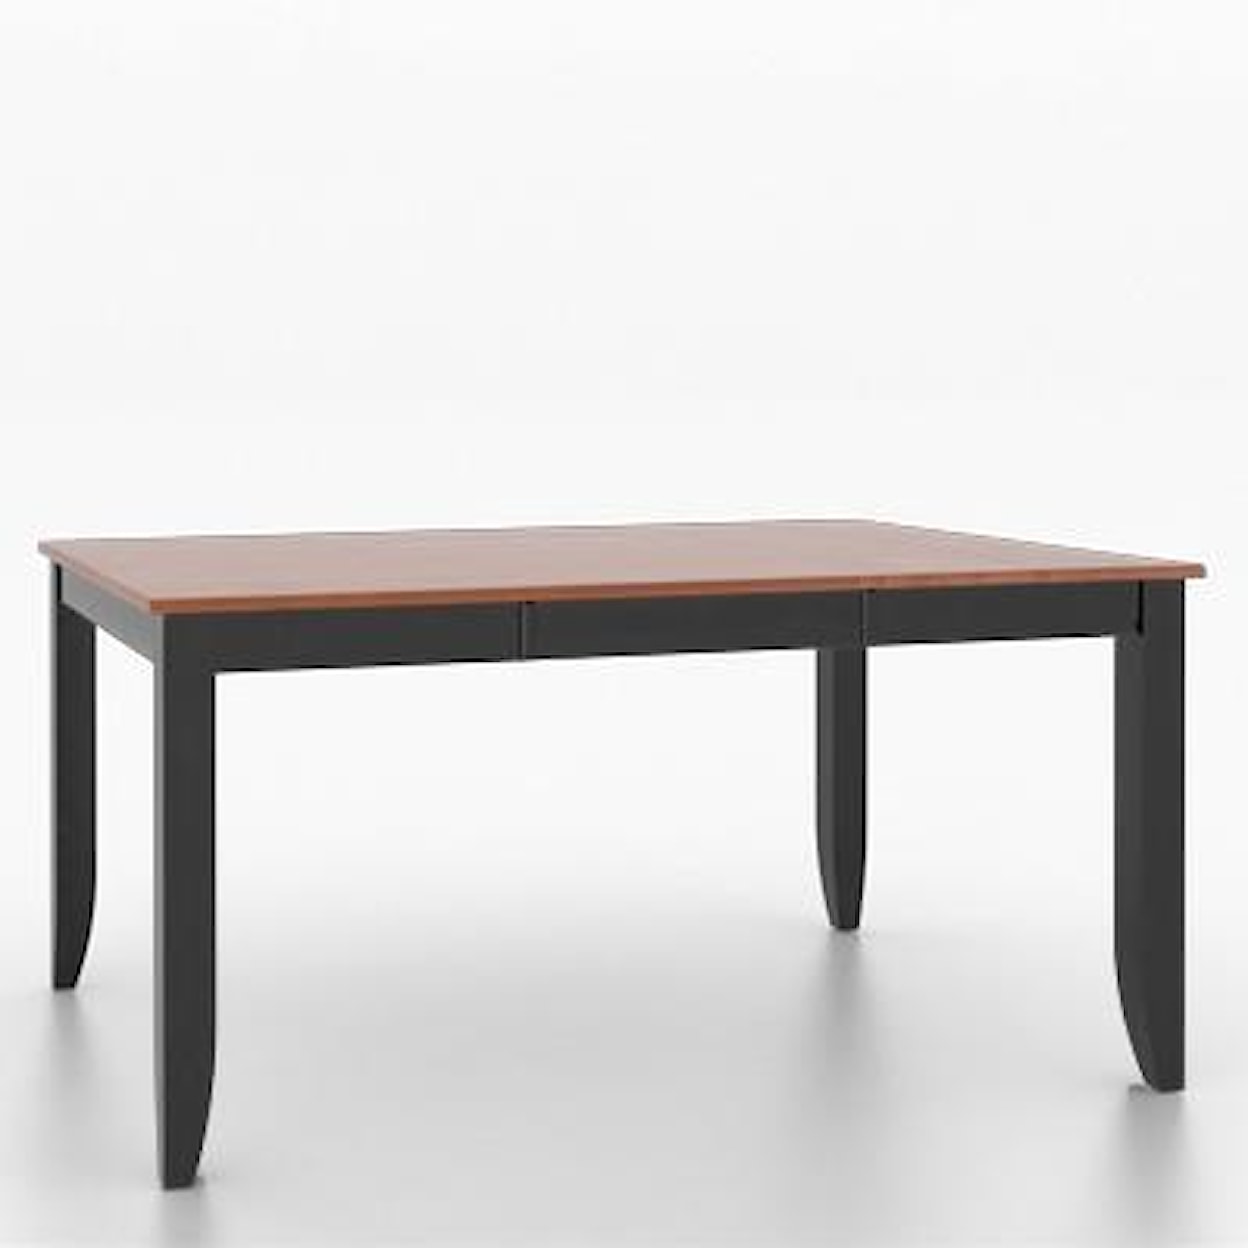 Canadel Canadel Customizable Square/Rectangular Dining Table